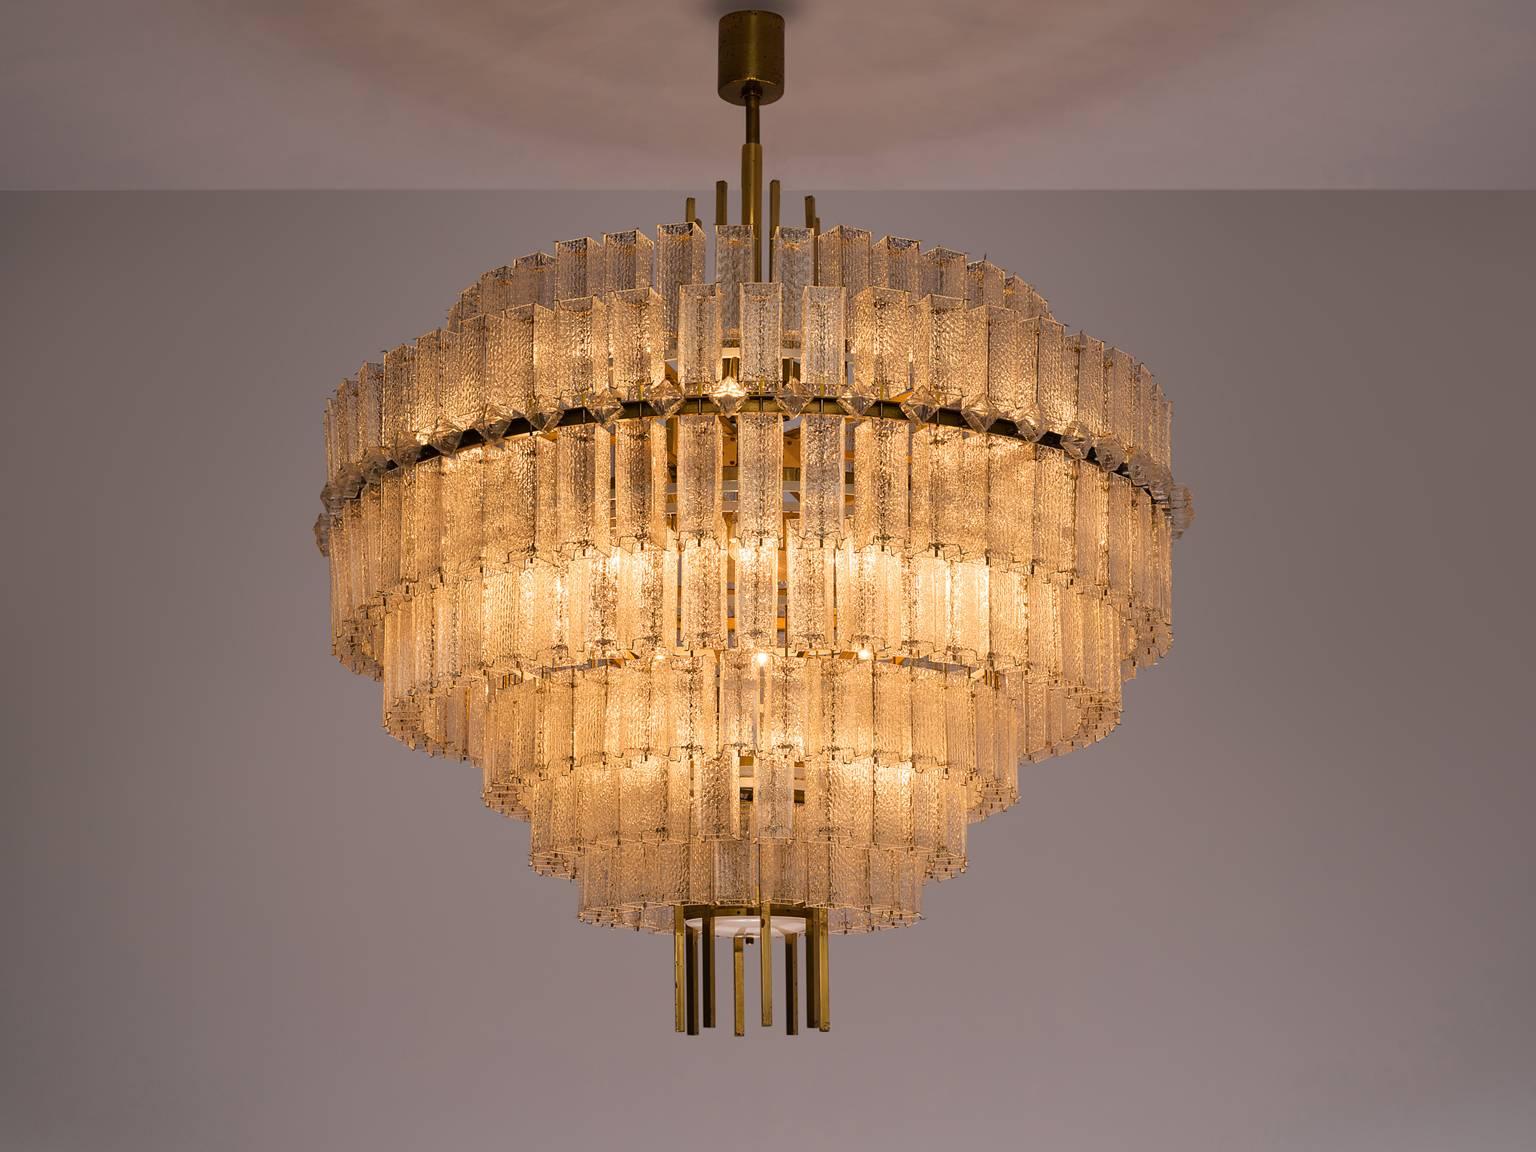 Chandelier, in glass and brass, Europe, 1970s. 

Large circular 200cm/6.5ft chandelier with seven layers of glass shades. The frame is made of brass and holds numerous structured glass 'tubes' with a brass centre. Due the combination of materials